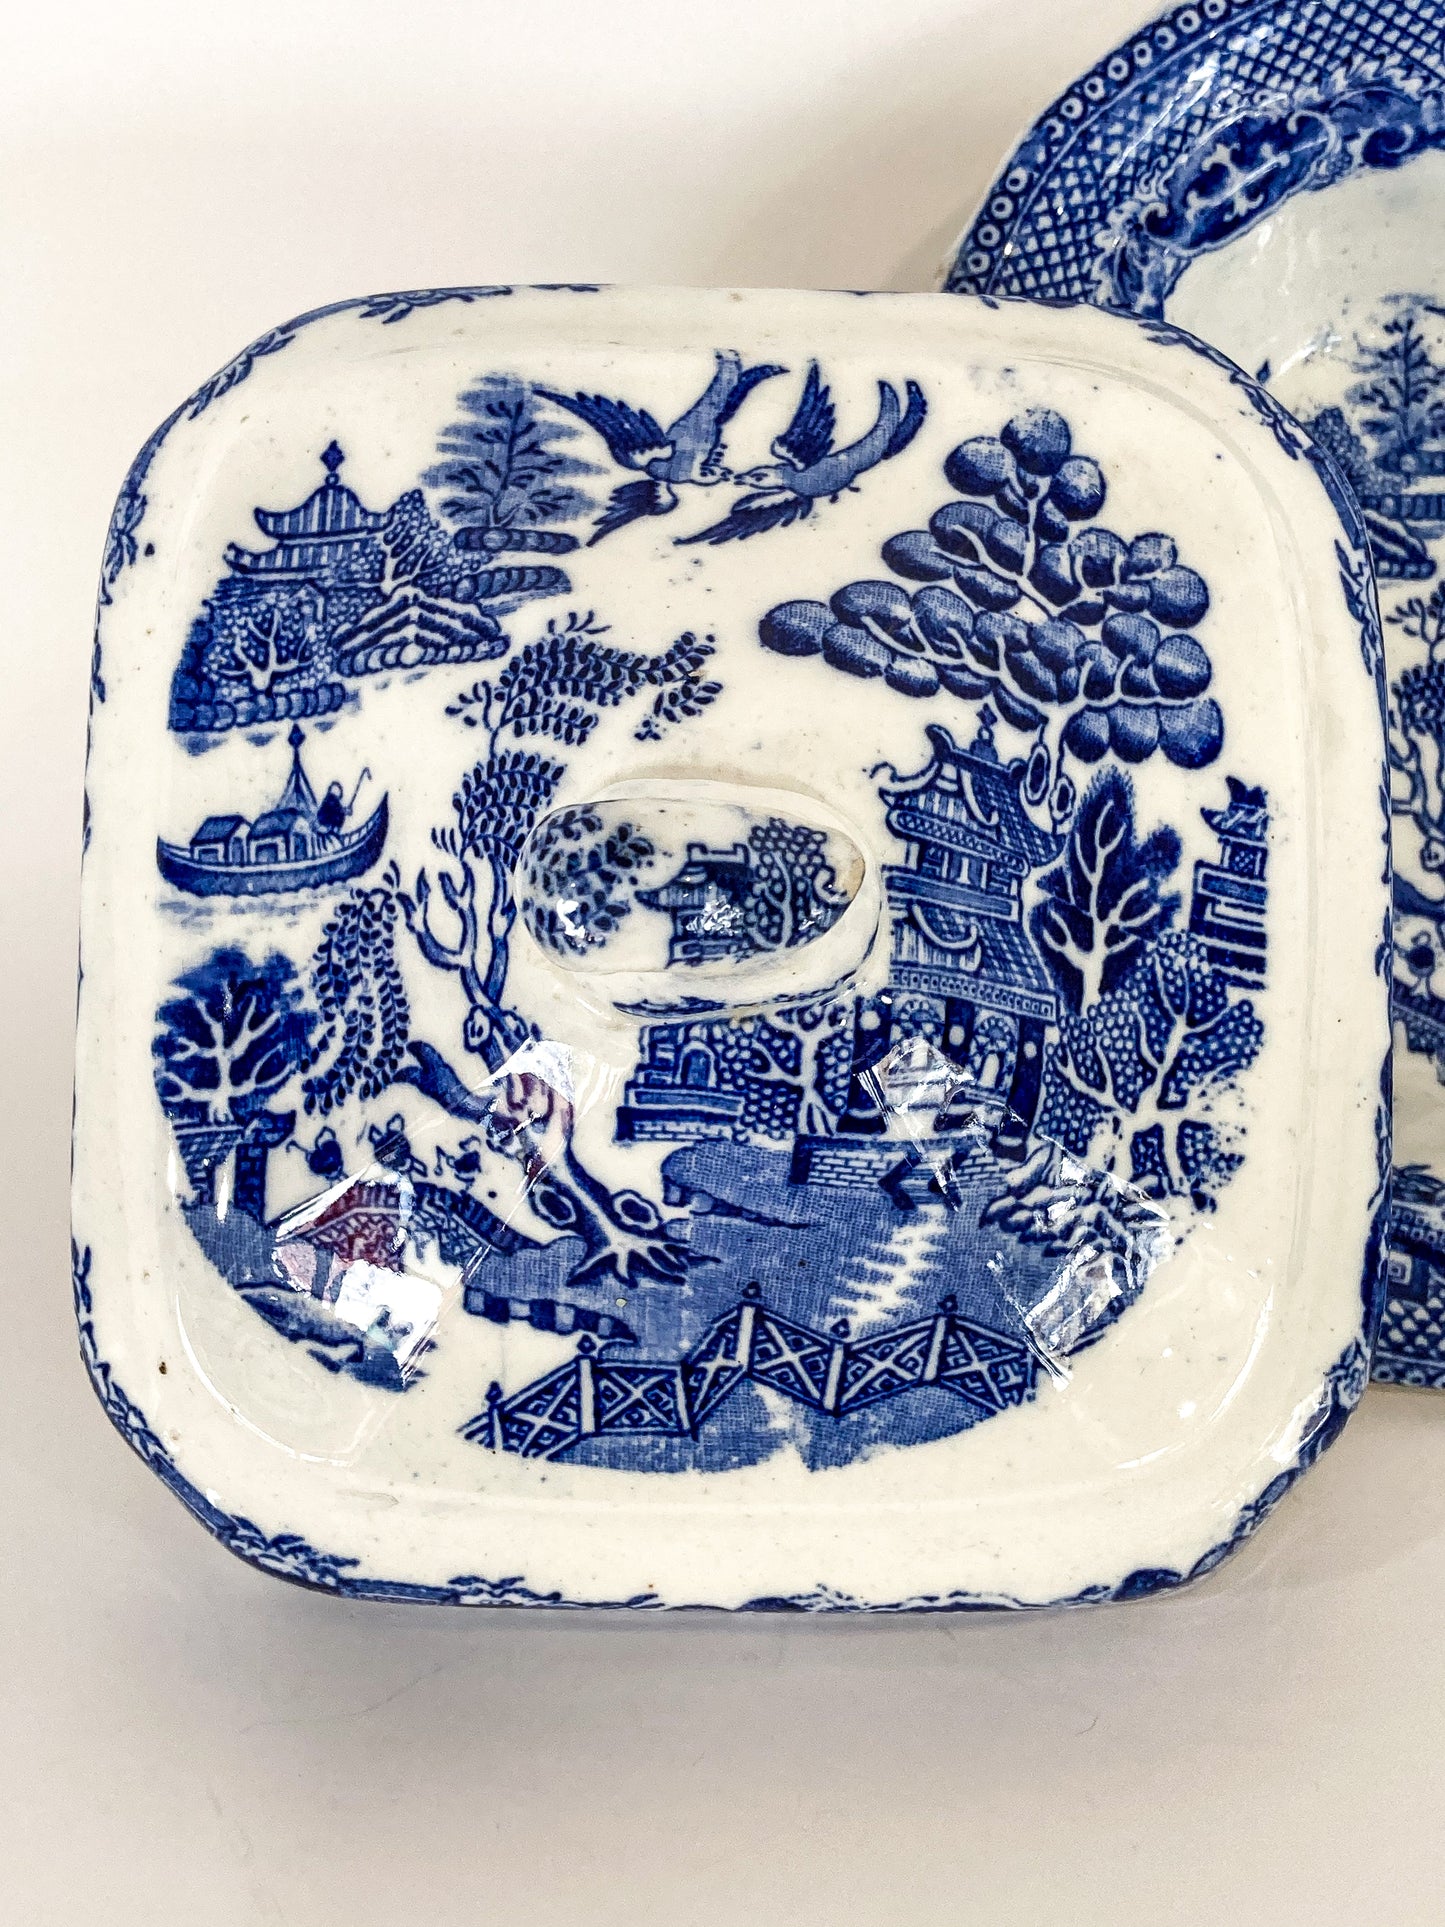 Antique Warranted Staffordshire Blue Willow Covered Porcelain Vegetable Bowl Lid Close Up Top